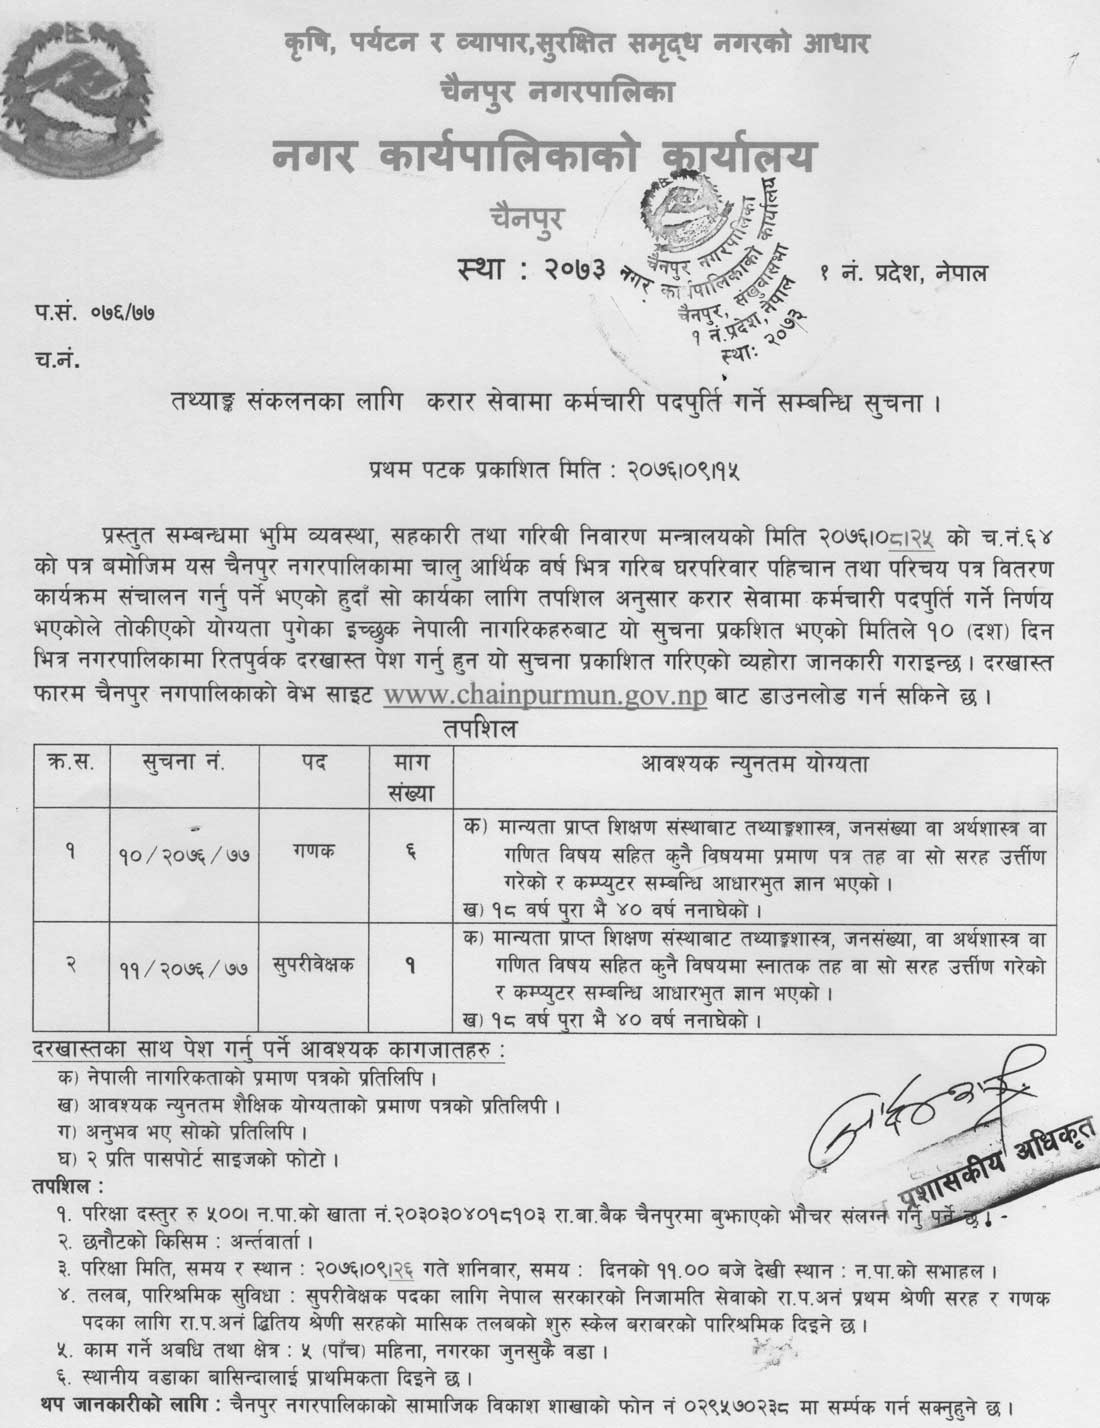 Chainpur Municipality Vacancy for Supervisor and Data Collector